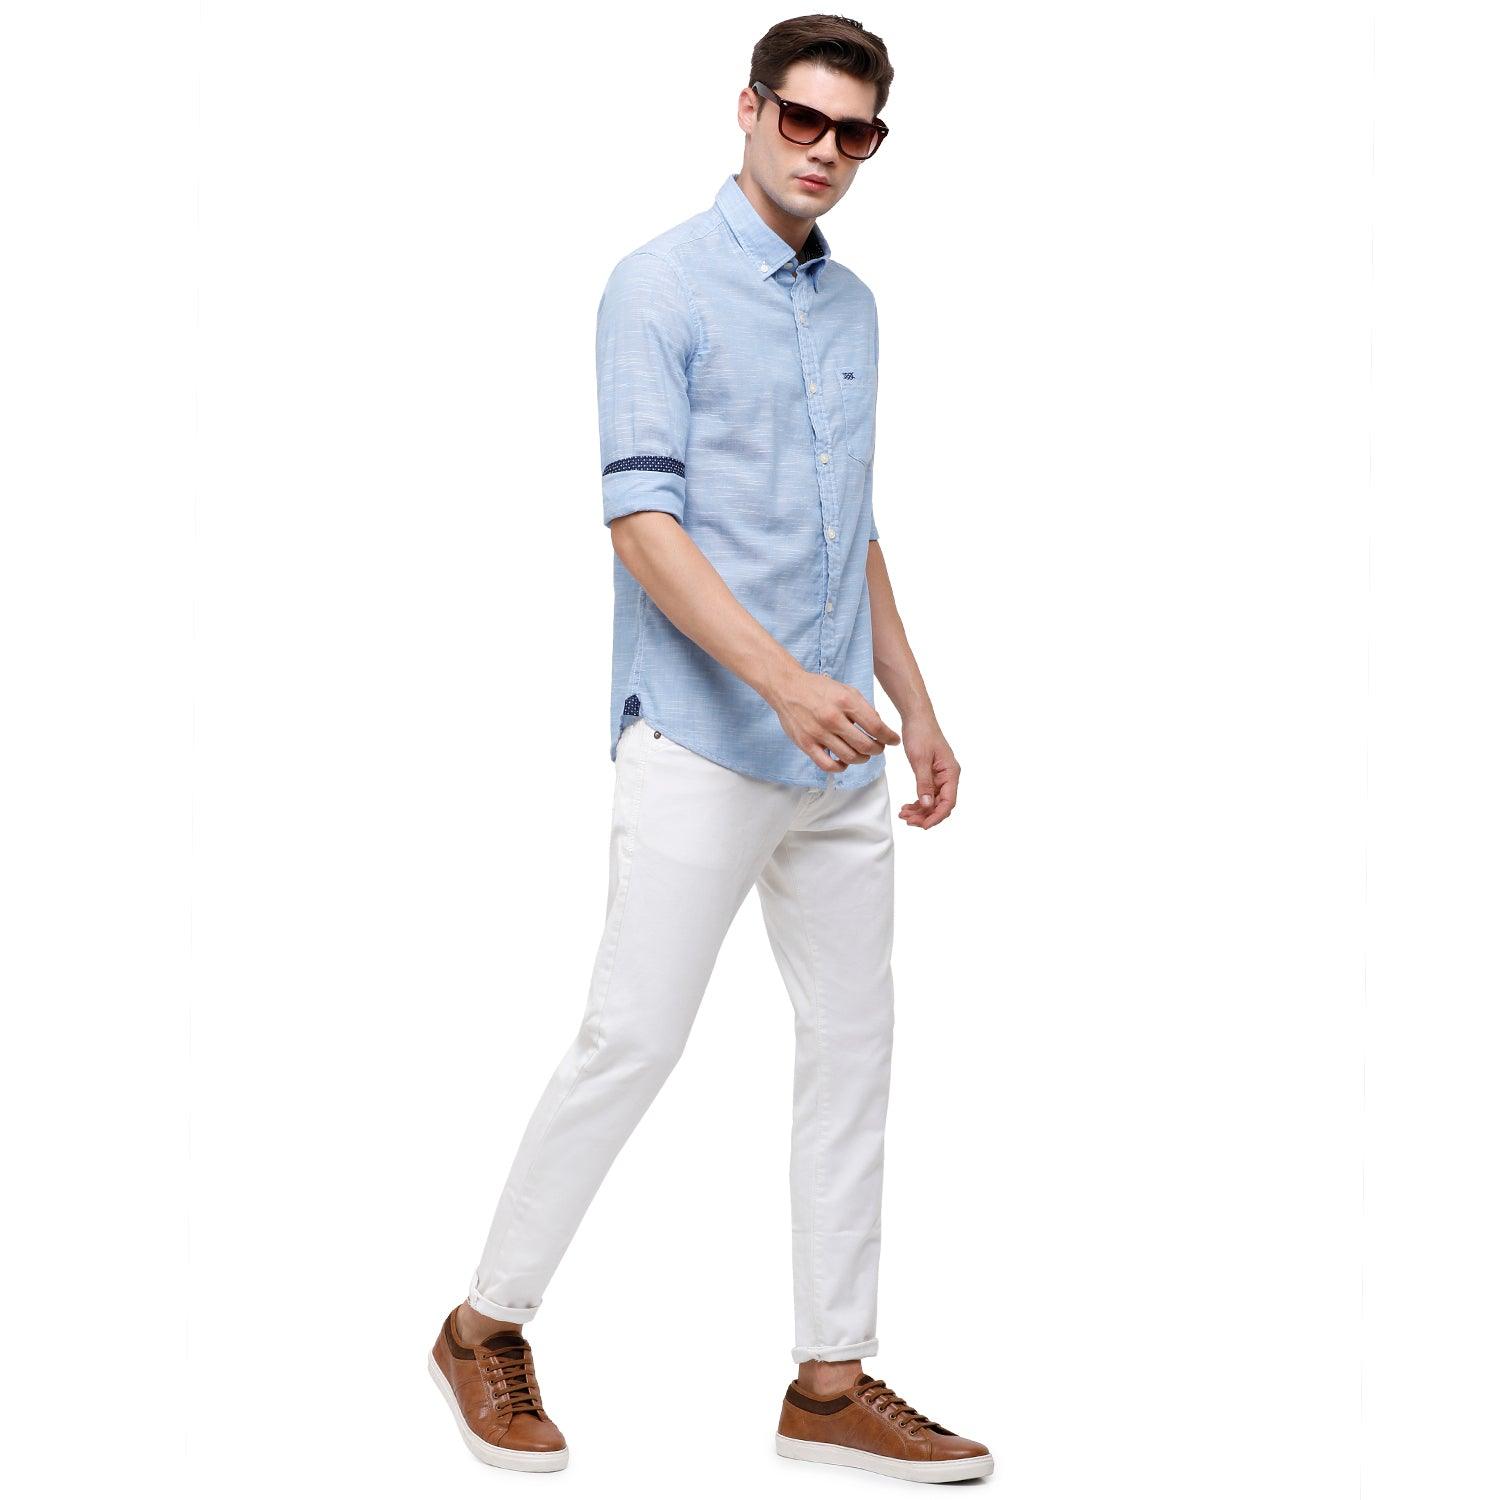 Double two Men Solid Light Blue Button down collar Long Sleeves 100% Cotton Slim Fit Casual shirt